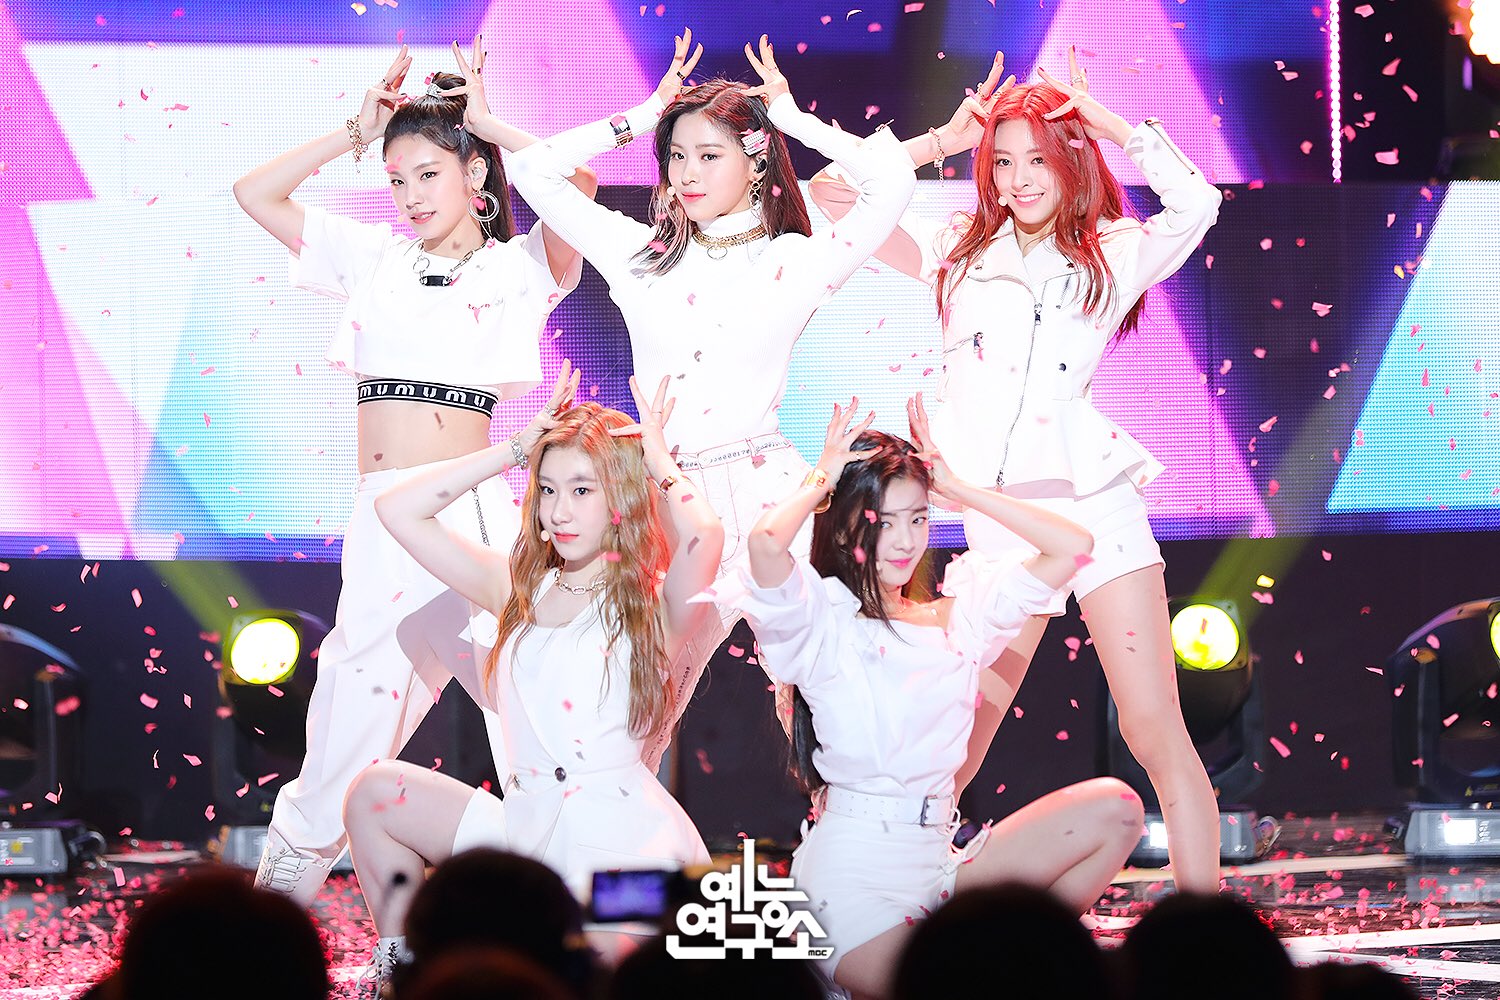 190227 Photos — Ryujin on ITZY Performance at MBC Music Core